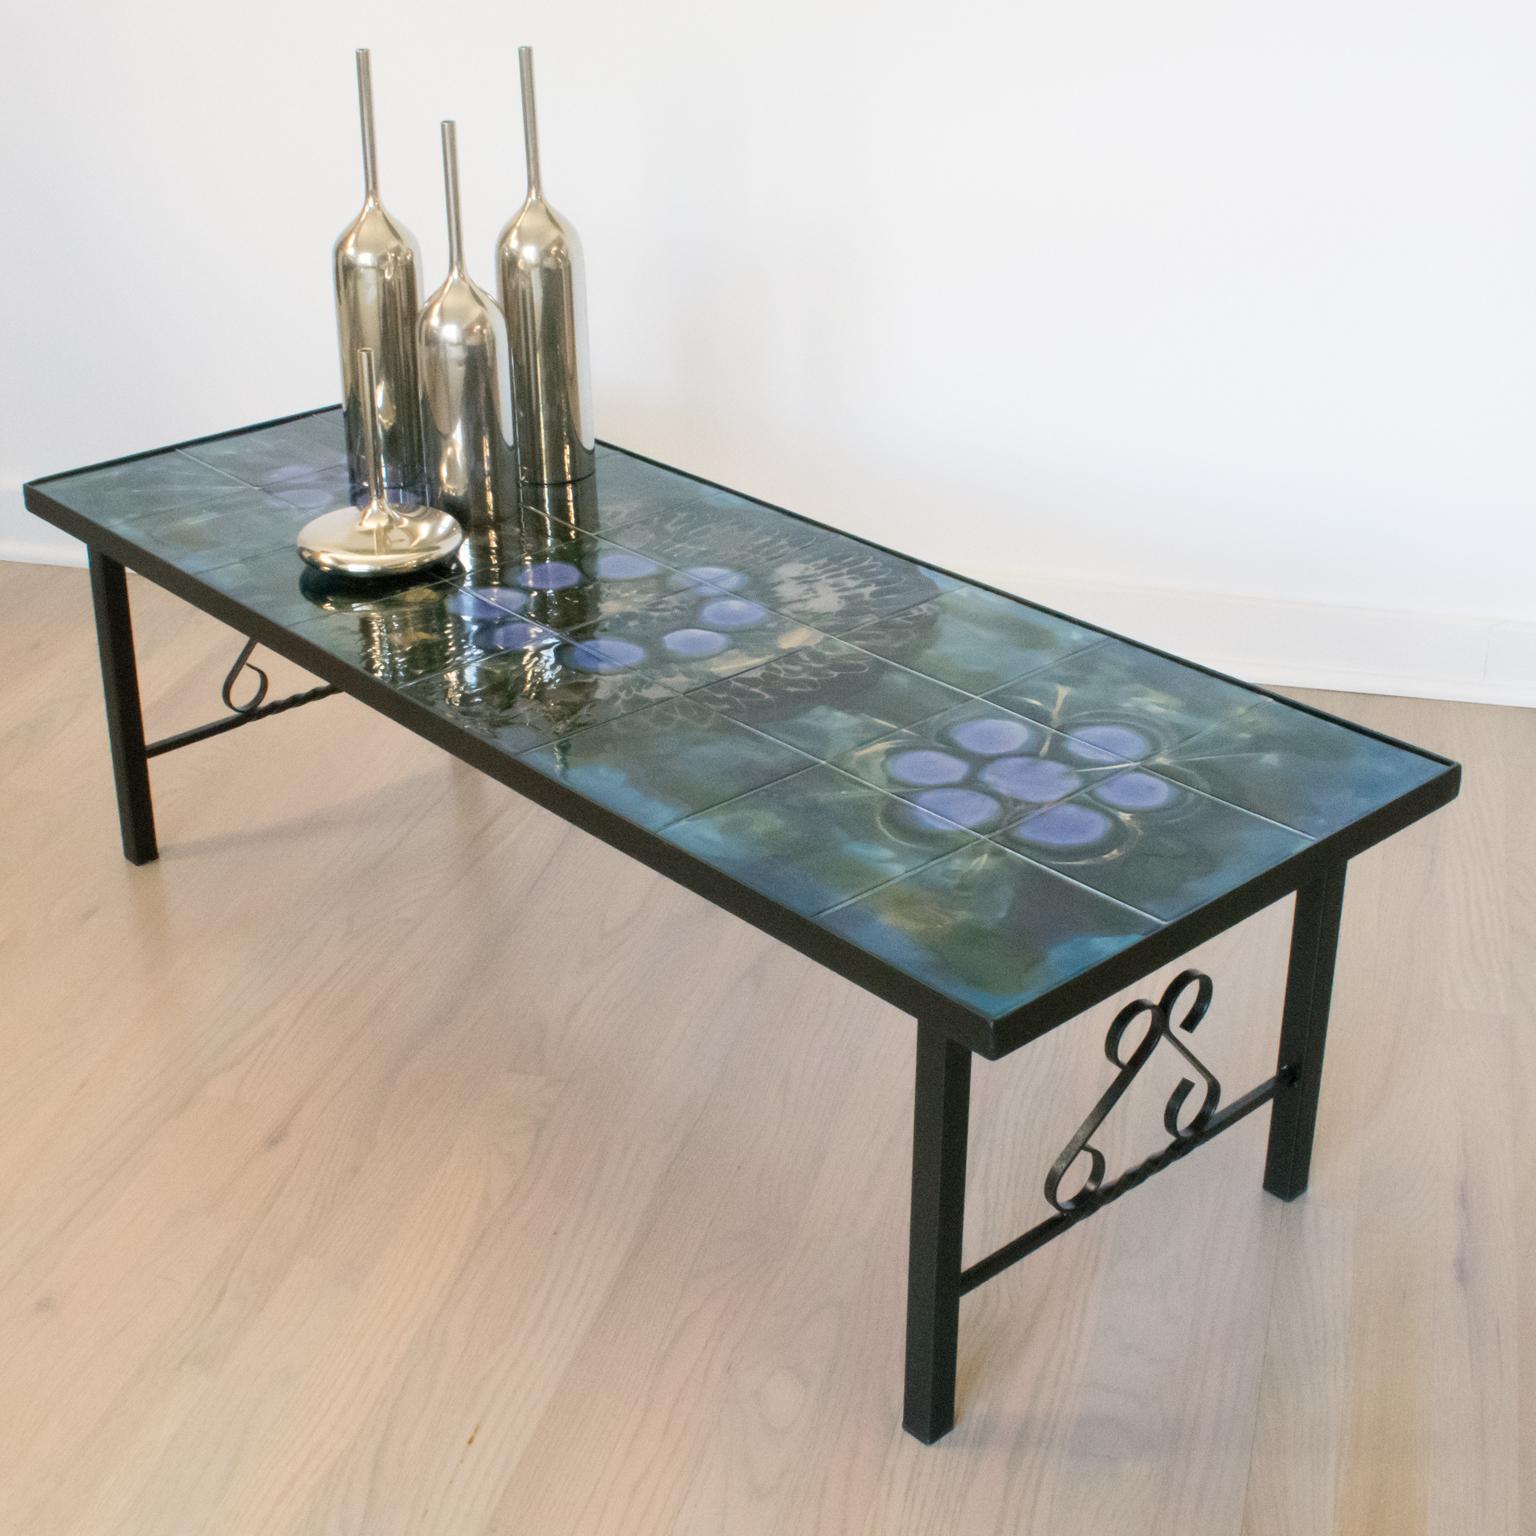 Belarti Wrought Iron Ceramic Tile Side Coffee Table, 1960s In Good Condition For Sale In Atlanta, GA